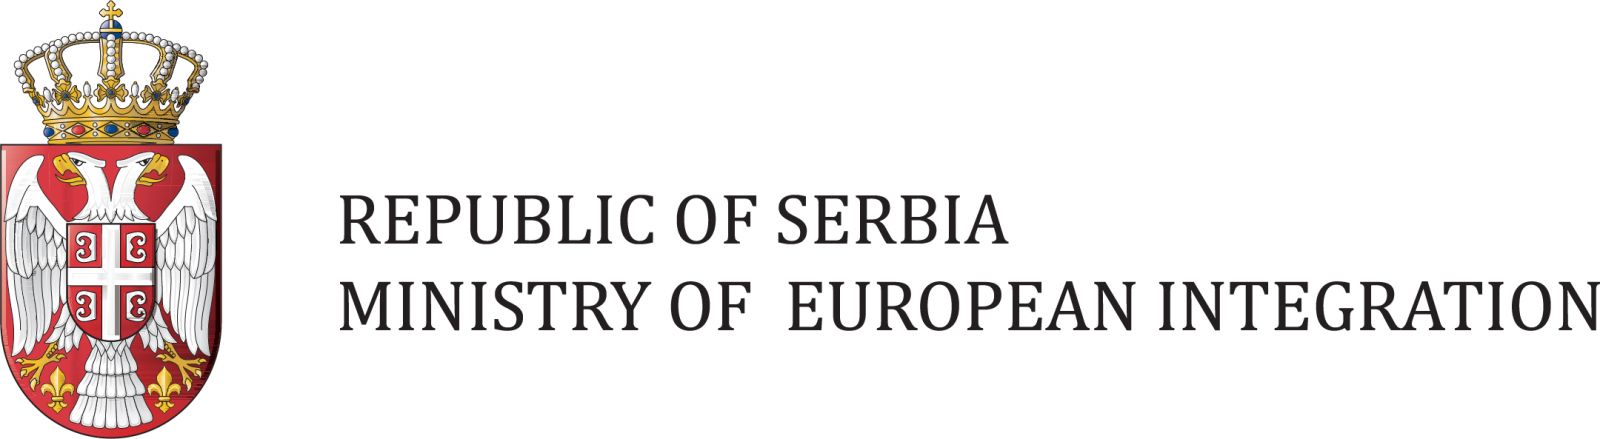 Webinar on the Republic of Serbia’s experiences in the European integration process